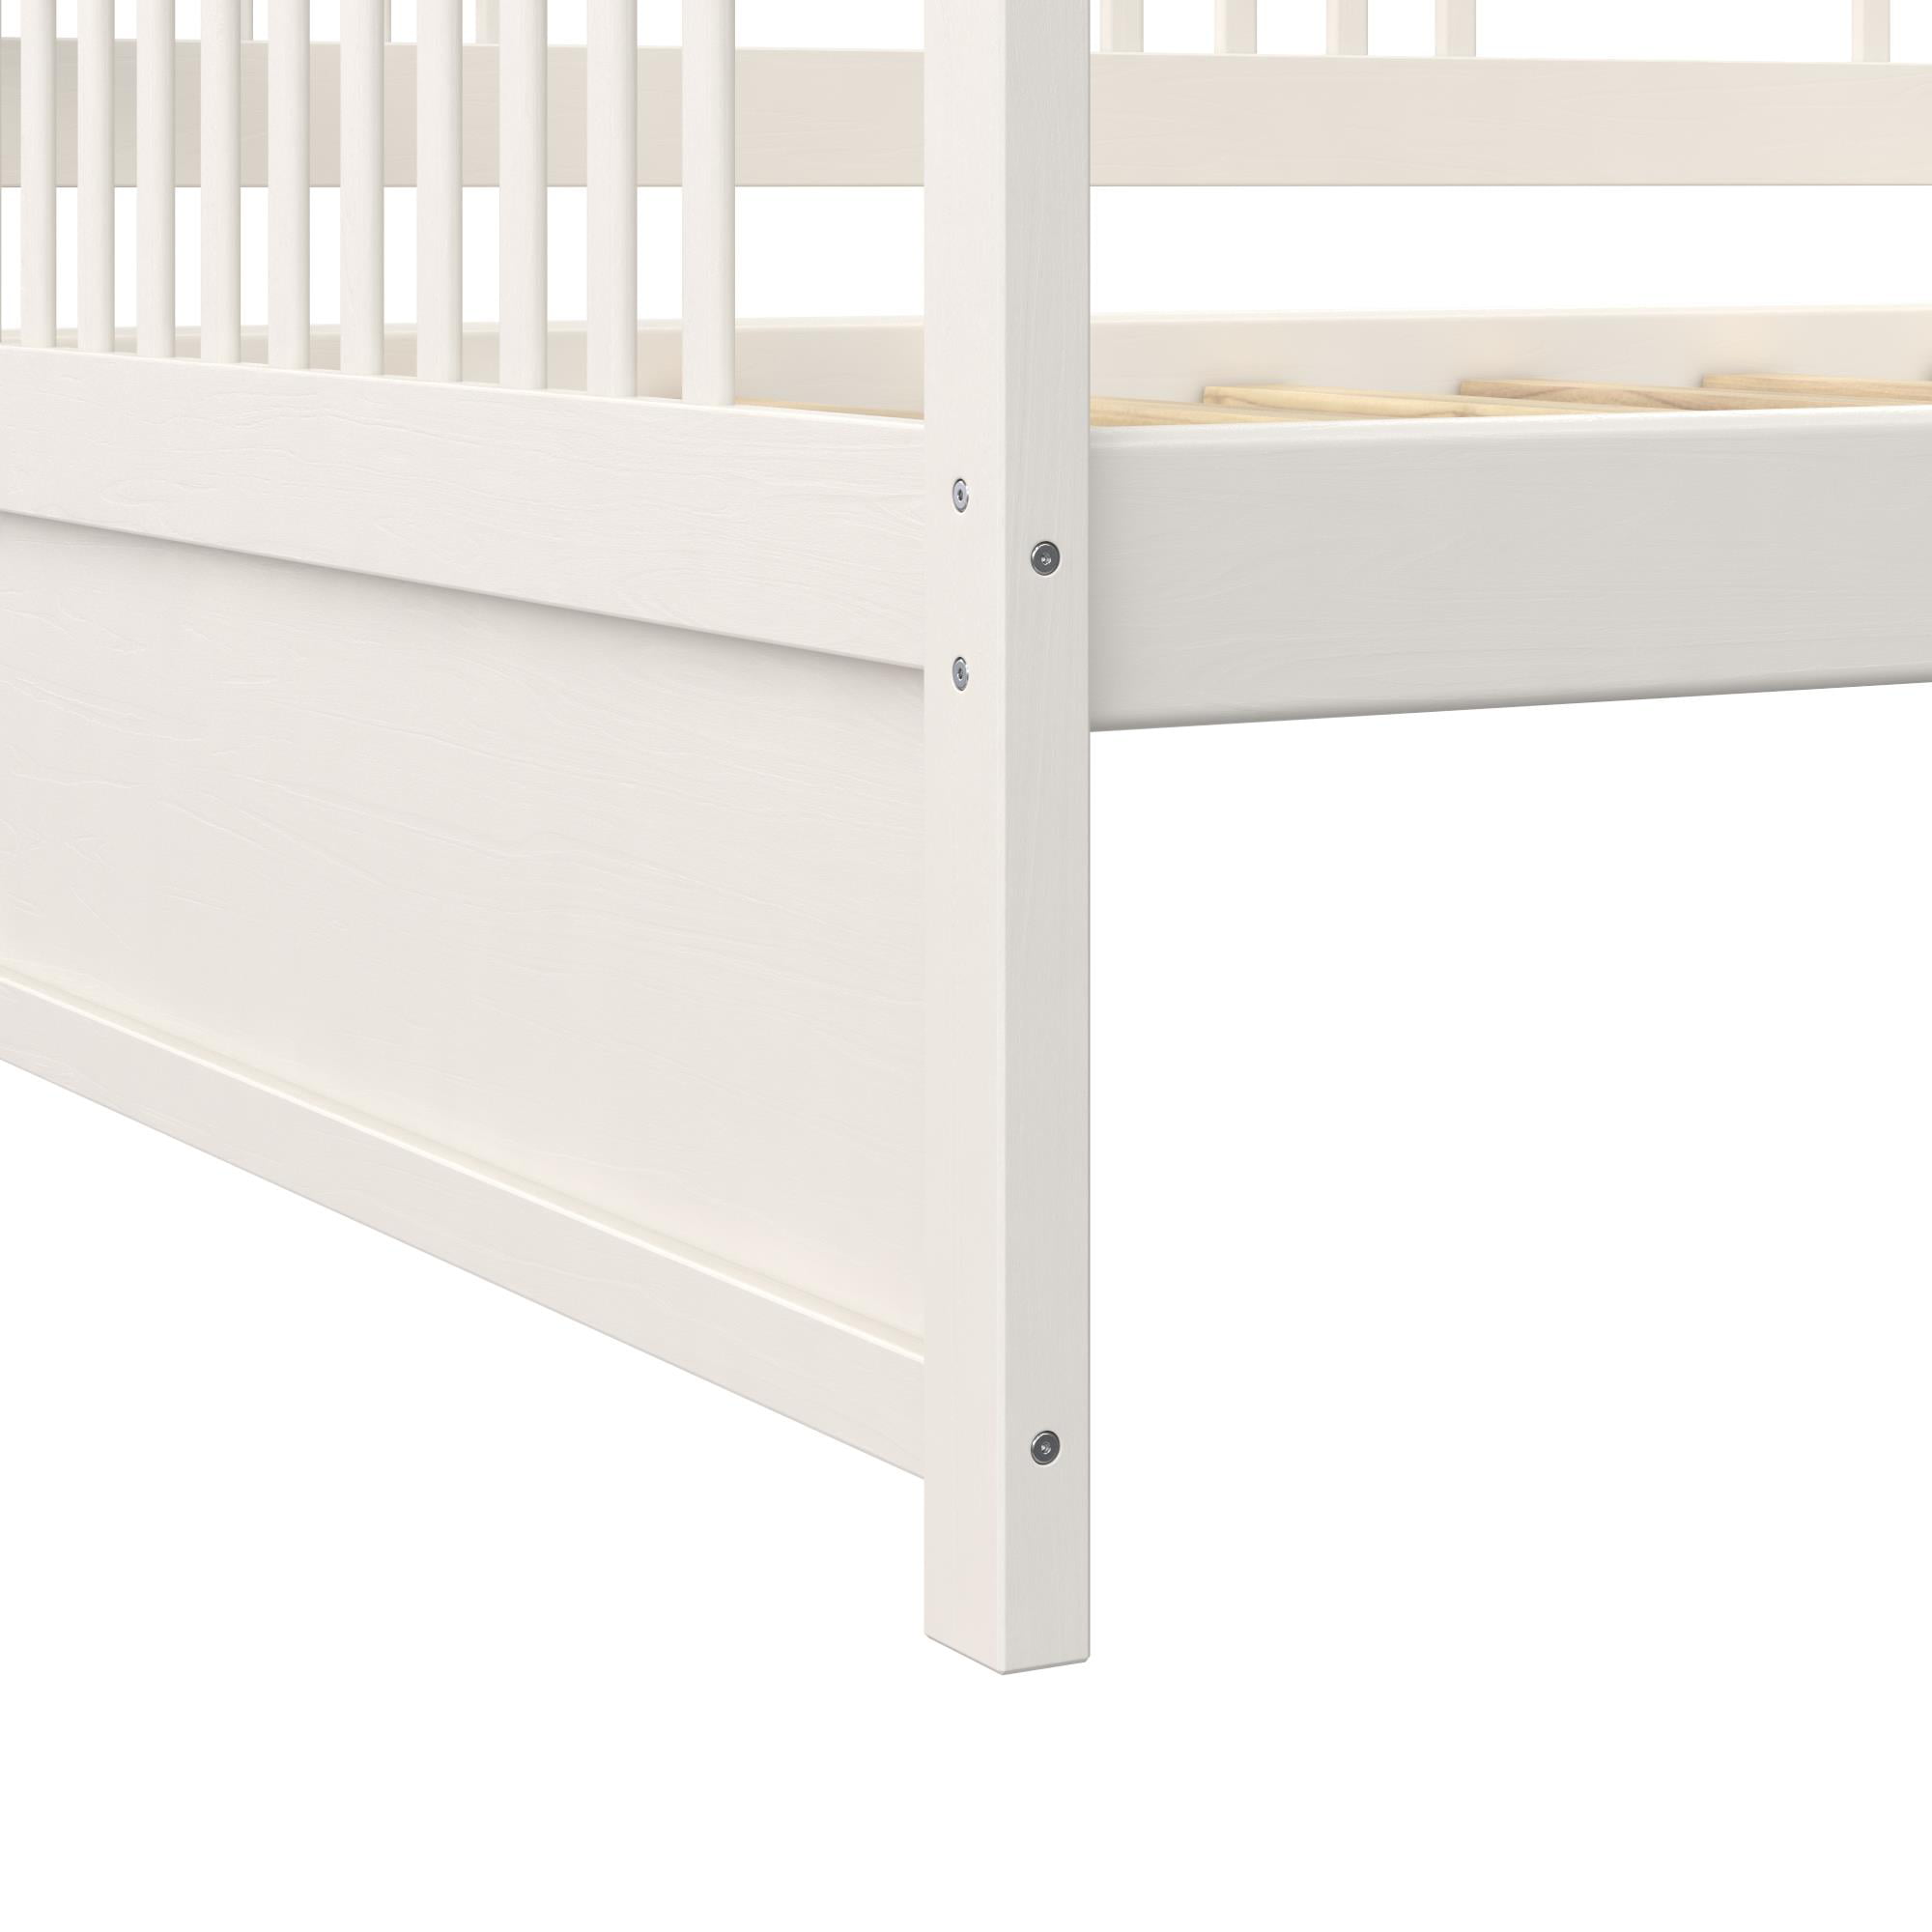 DHP Morgan Daybed, Full Size Frame with Slats, White - Walmart.com